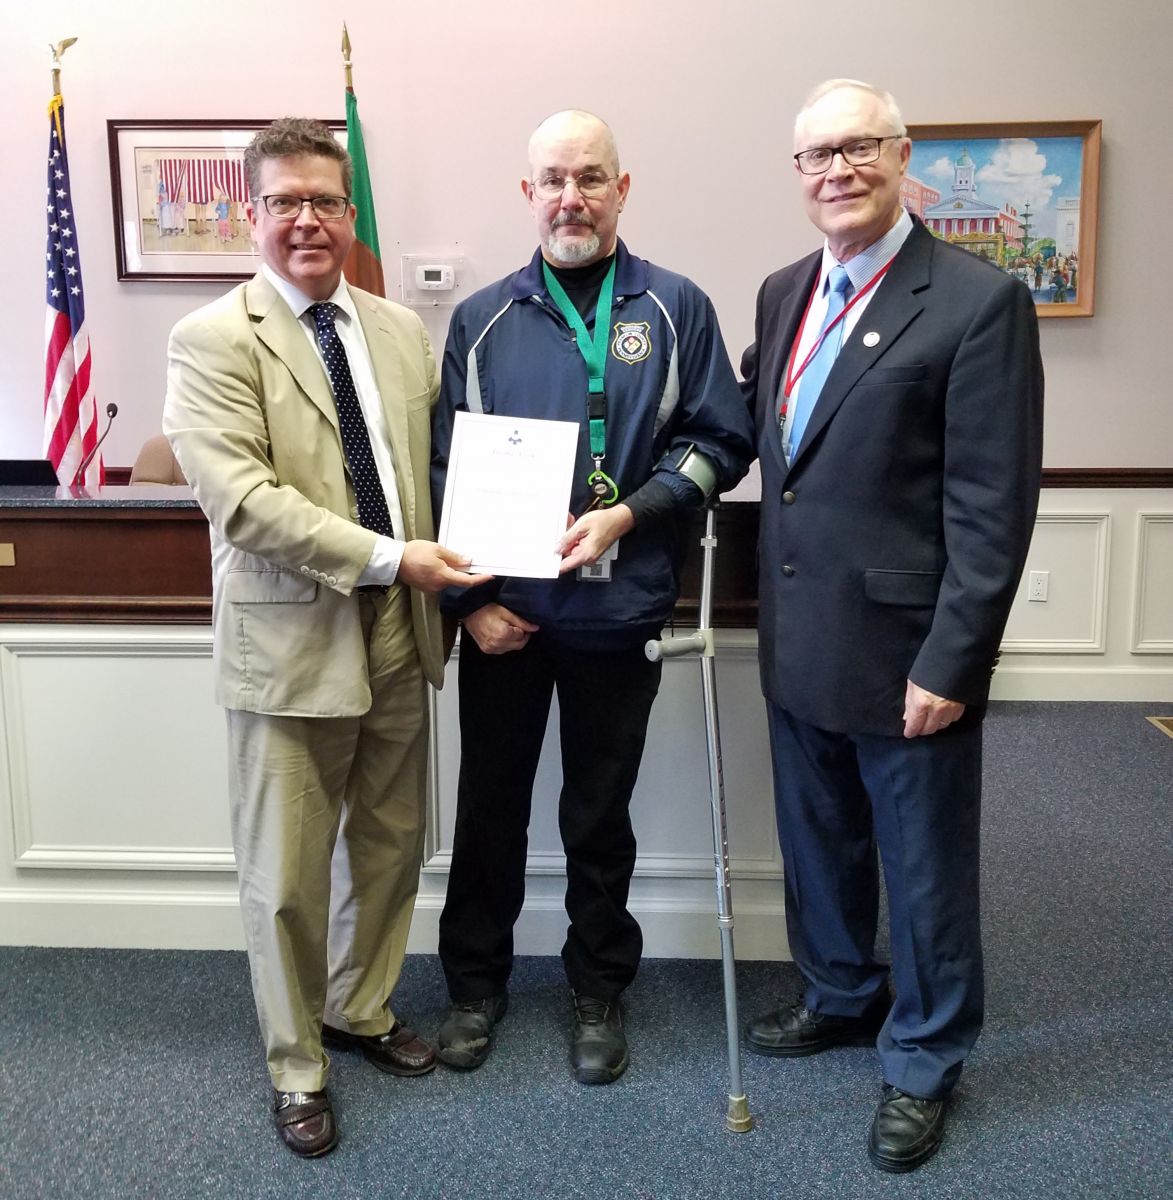 Pictured above: Commissioner Chairman Dave Keller, Department of Emergency Services Telecommunicator Tom Cook, Commissioner Bob Thomas